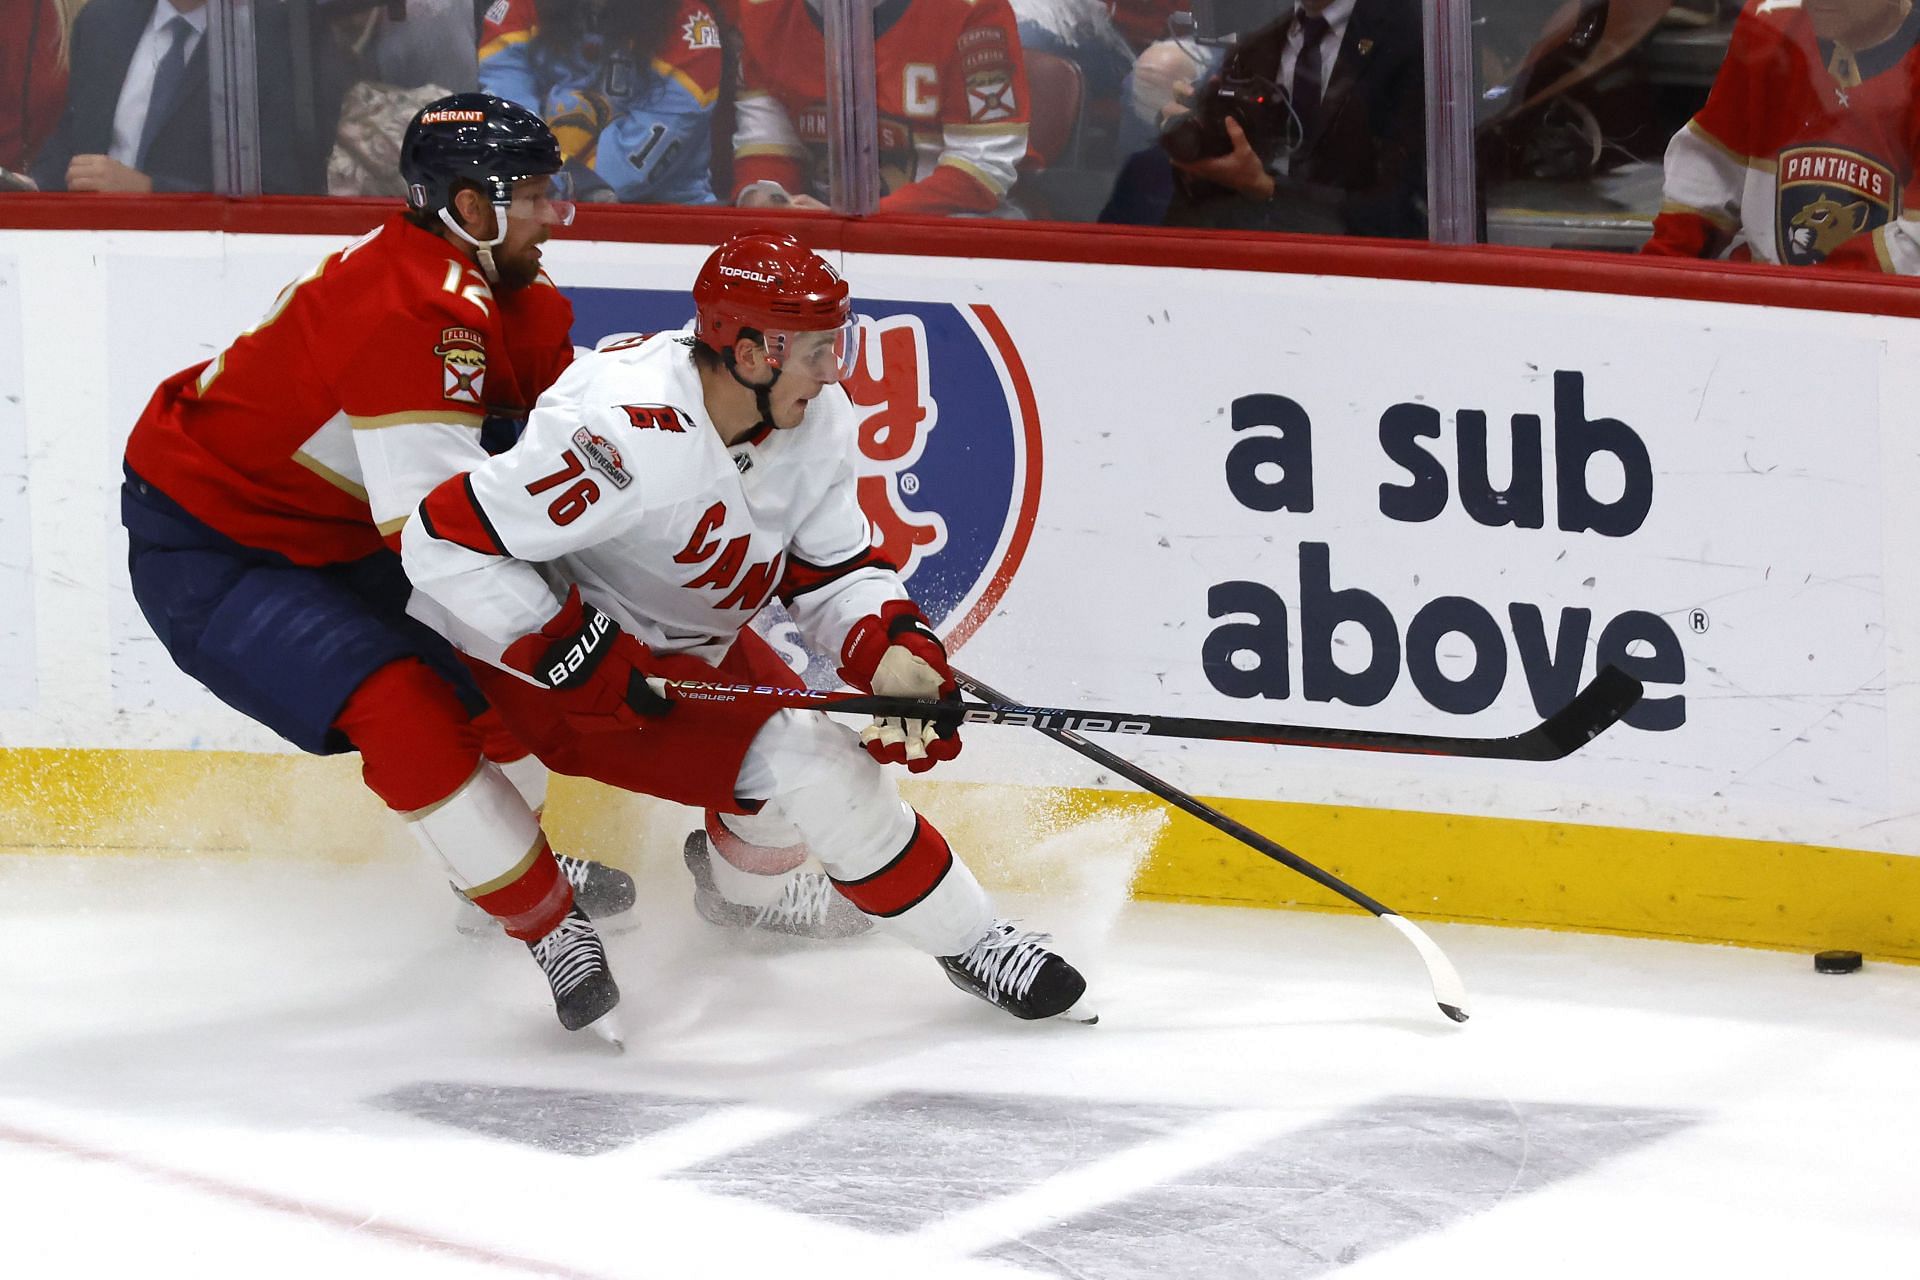 Carolina Hurricanes vs Florida Panthers Game 4 How to watch, TV channel list, live stream details and more